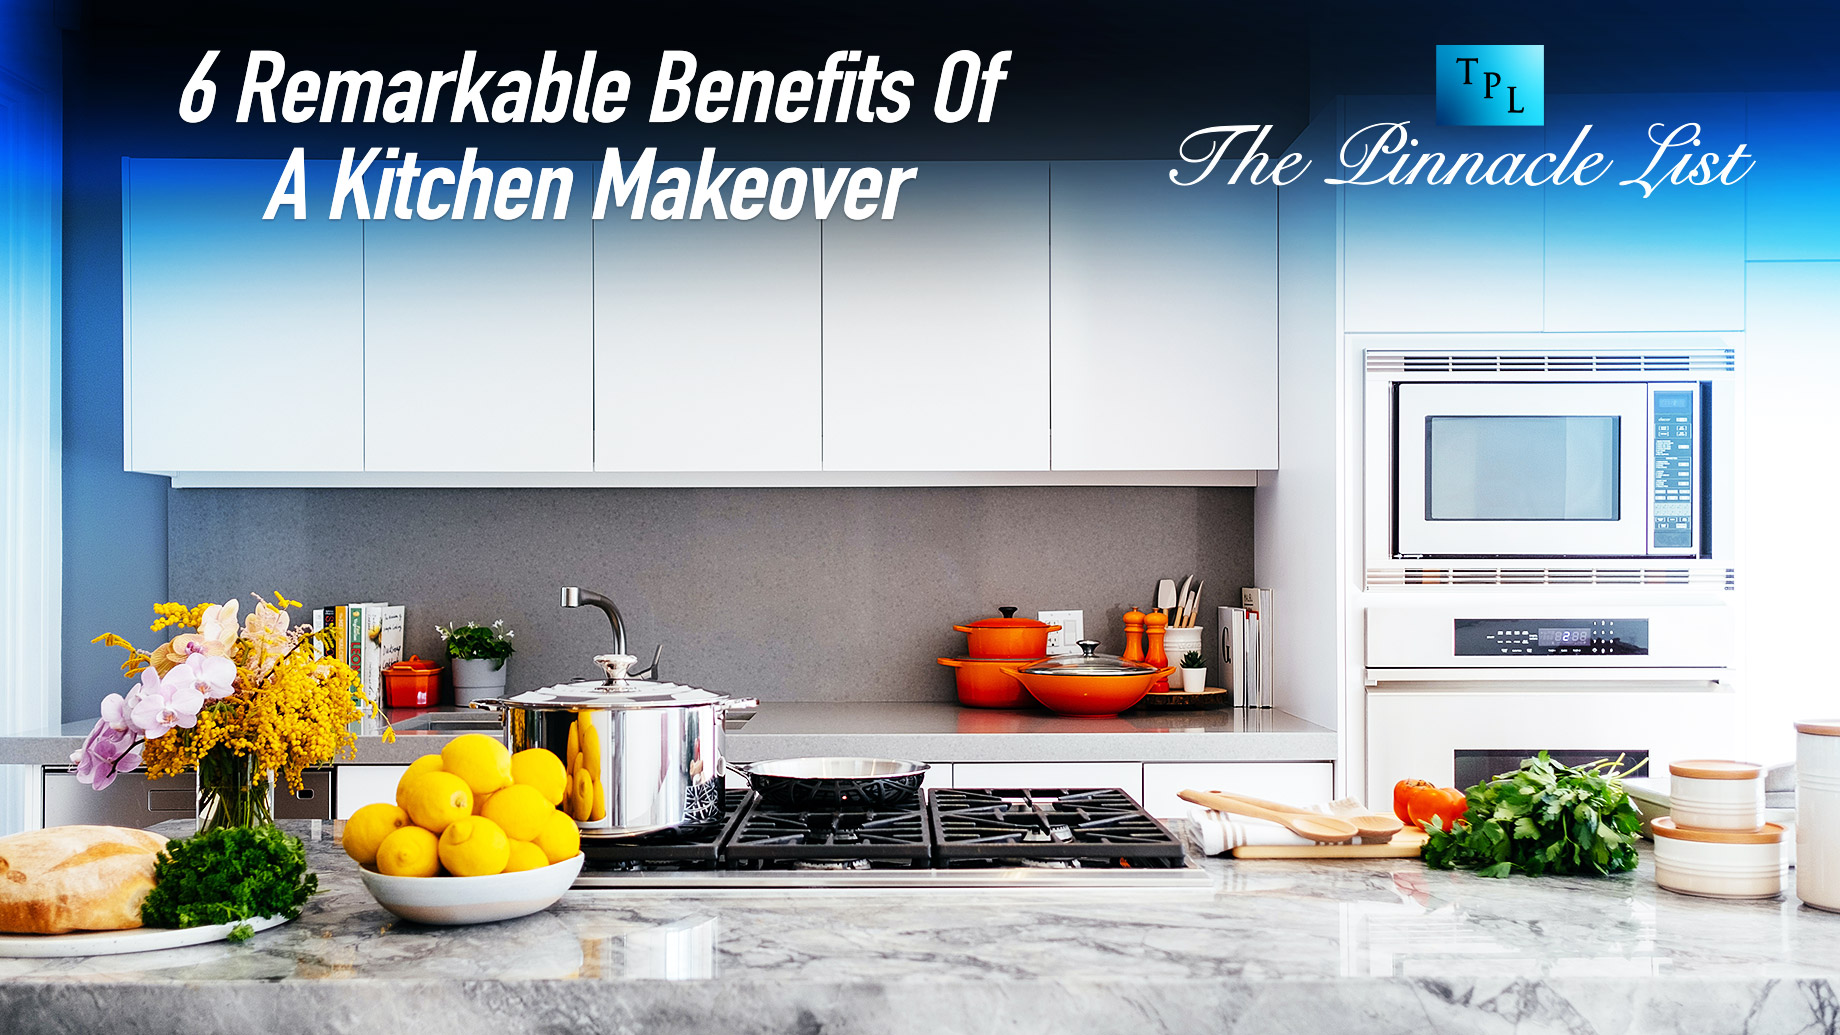 6 Remarkable Benefits Of A Kitchen Makeover